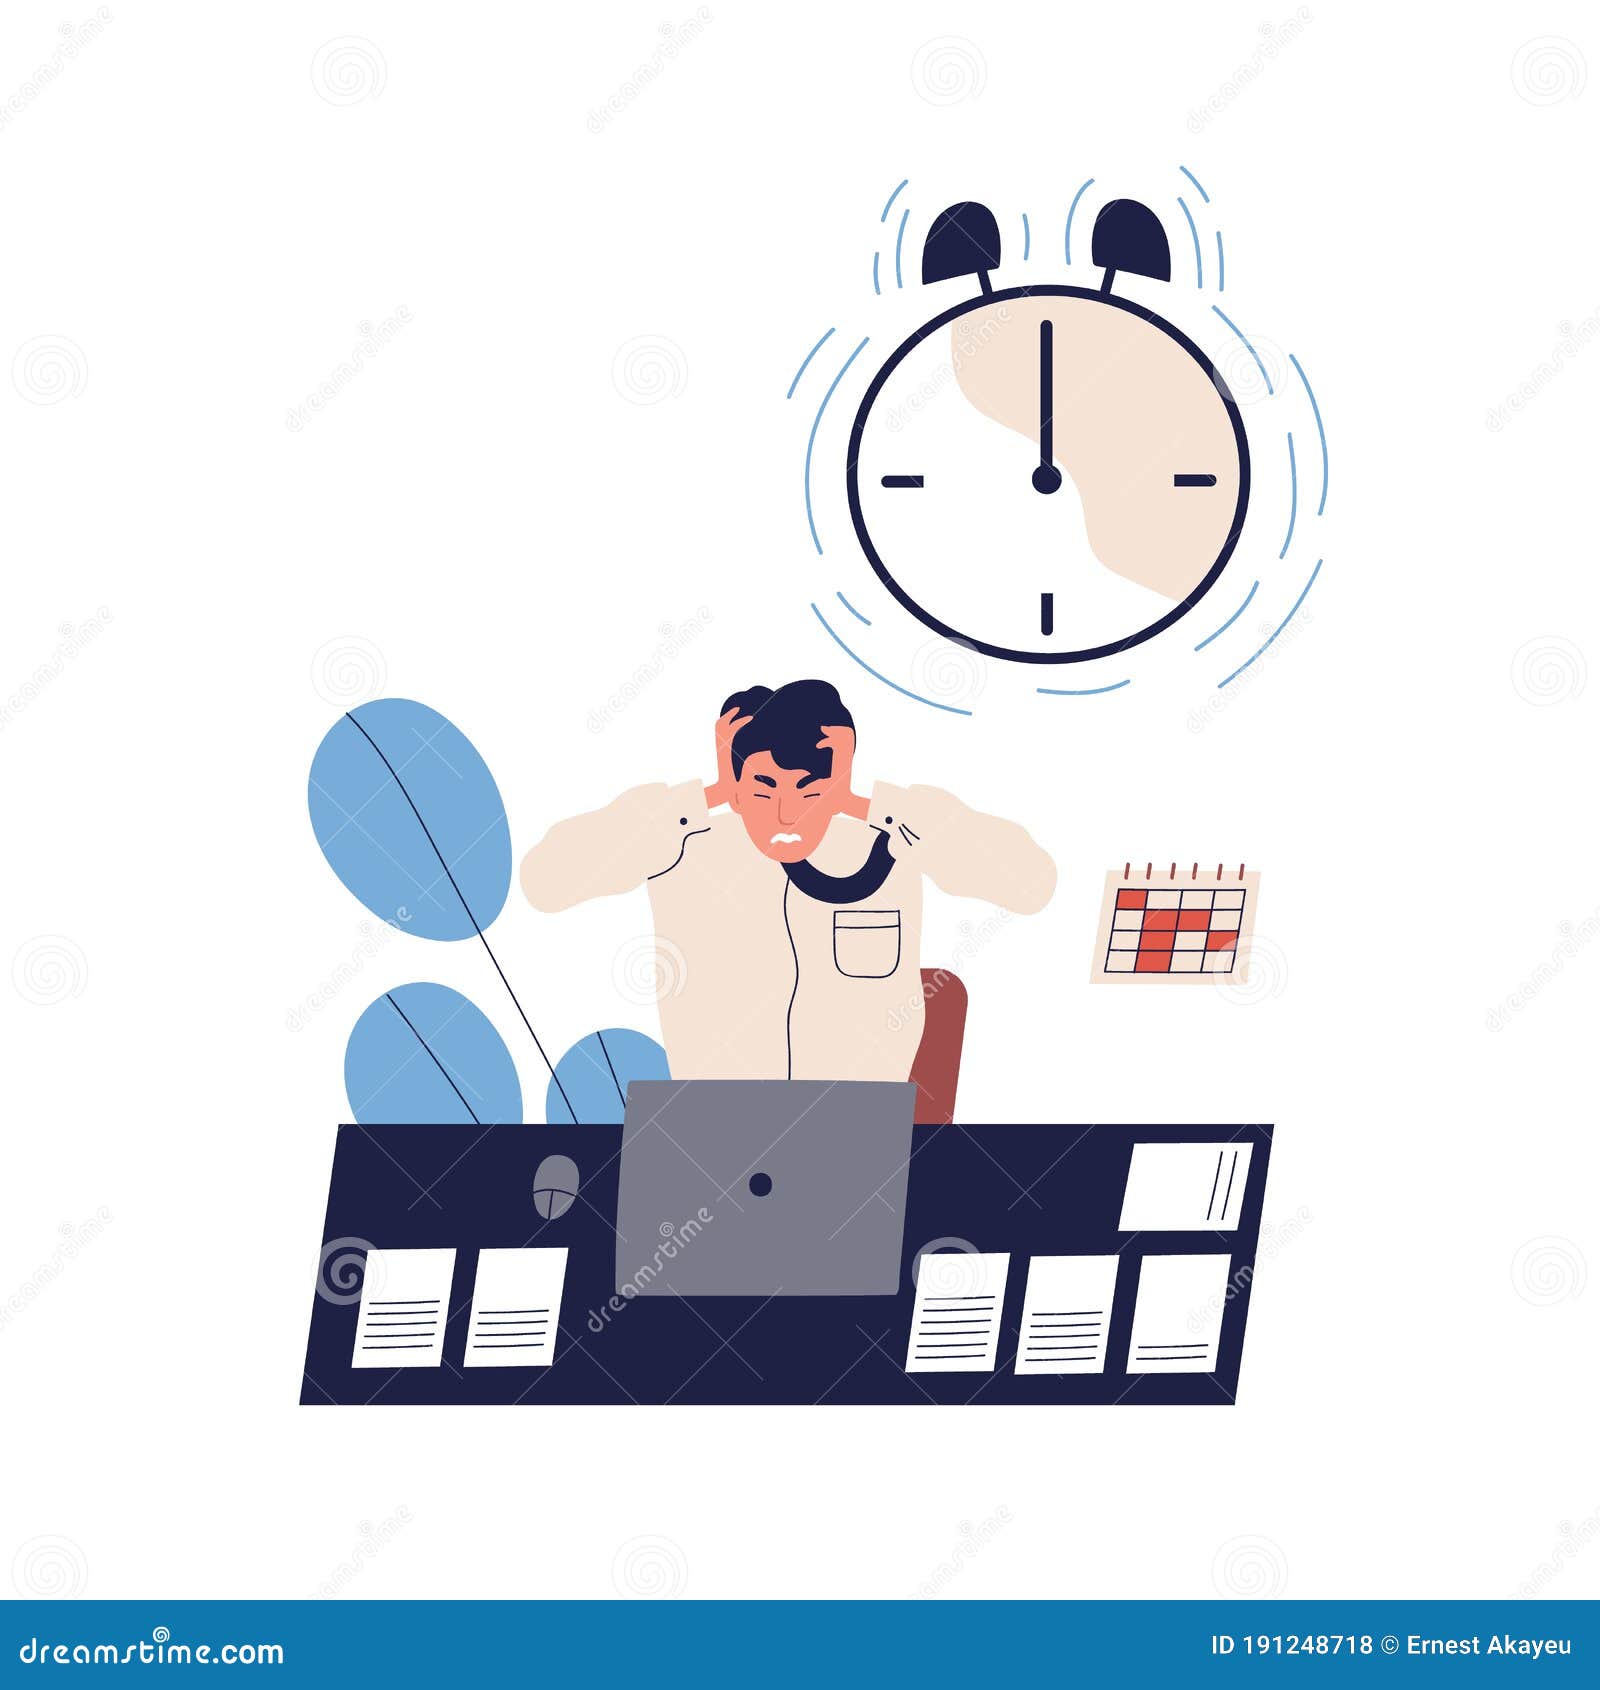 concept of missing deadline, bad time management. scene of tired, furious, stressed man clutch head, alarming clock